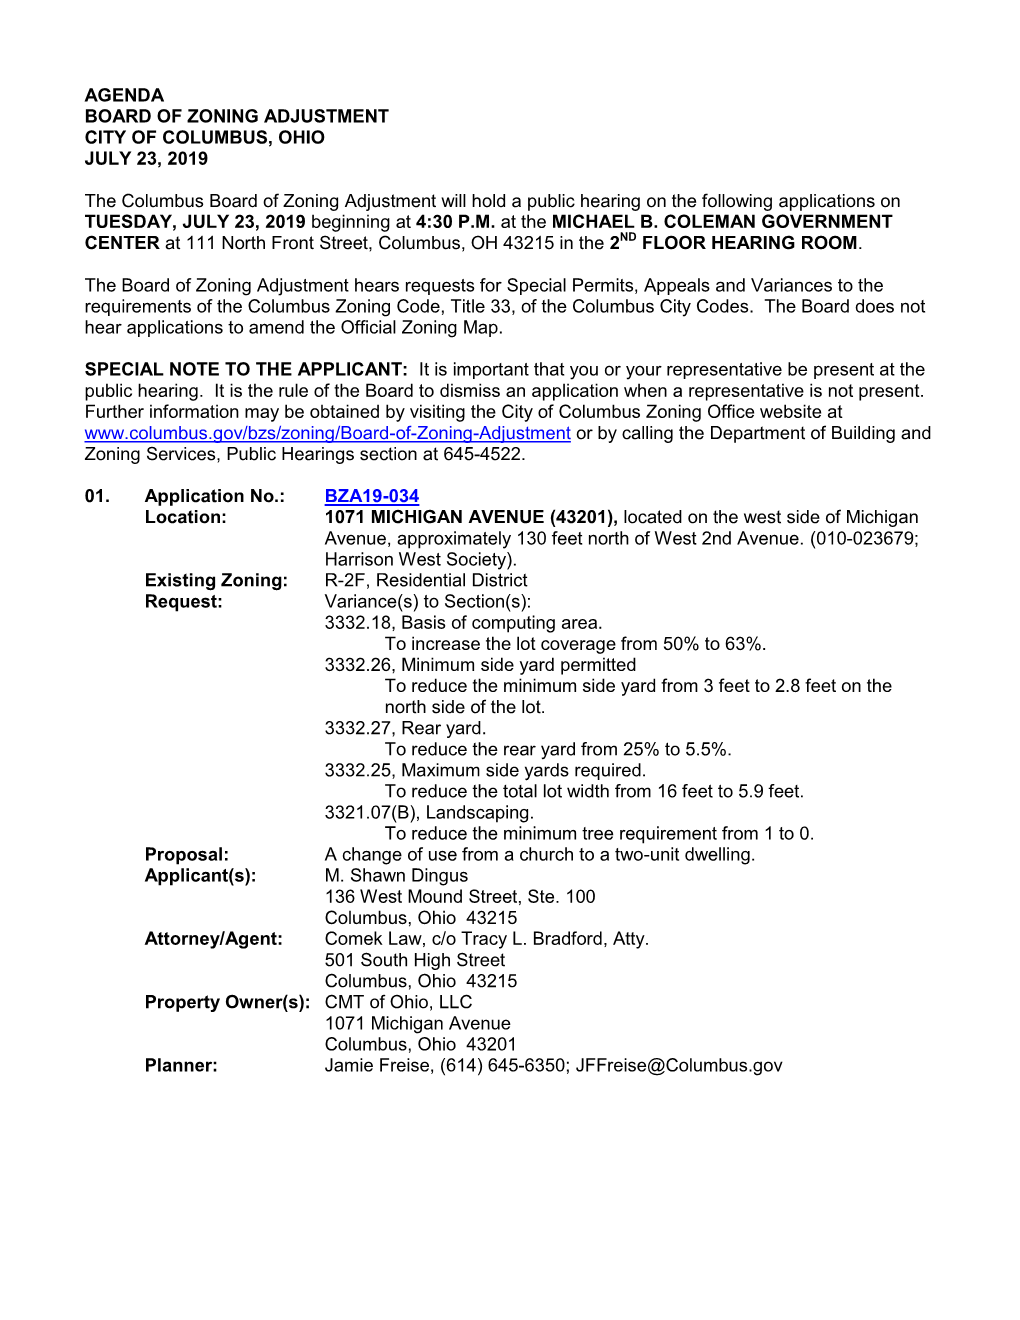 AGENDA BOARD of ZONING ADJUSTMENT CITY of COLUMBUS, OHIO JULY 23, 2019 the Columbus Board of Zoning Adjustment Will Hold a Publi